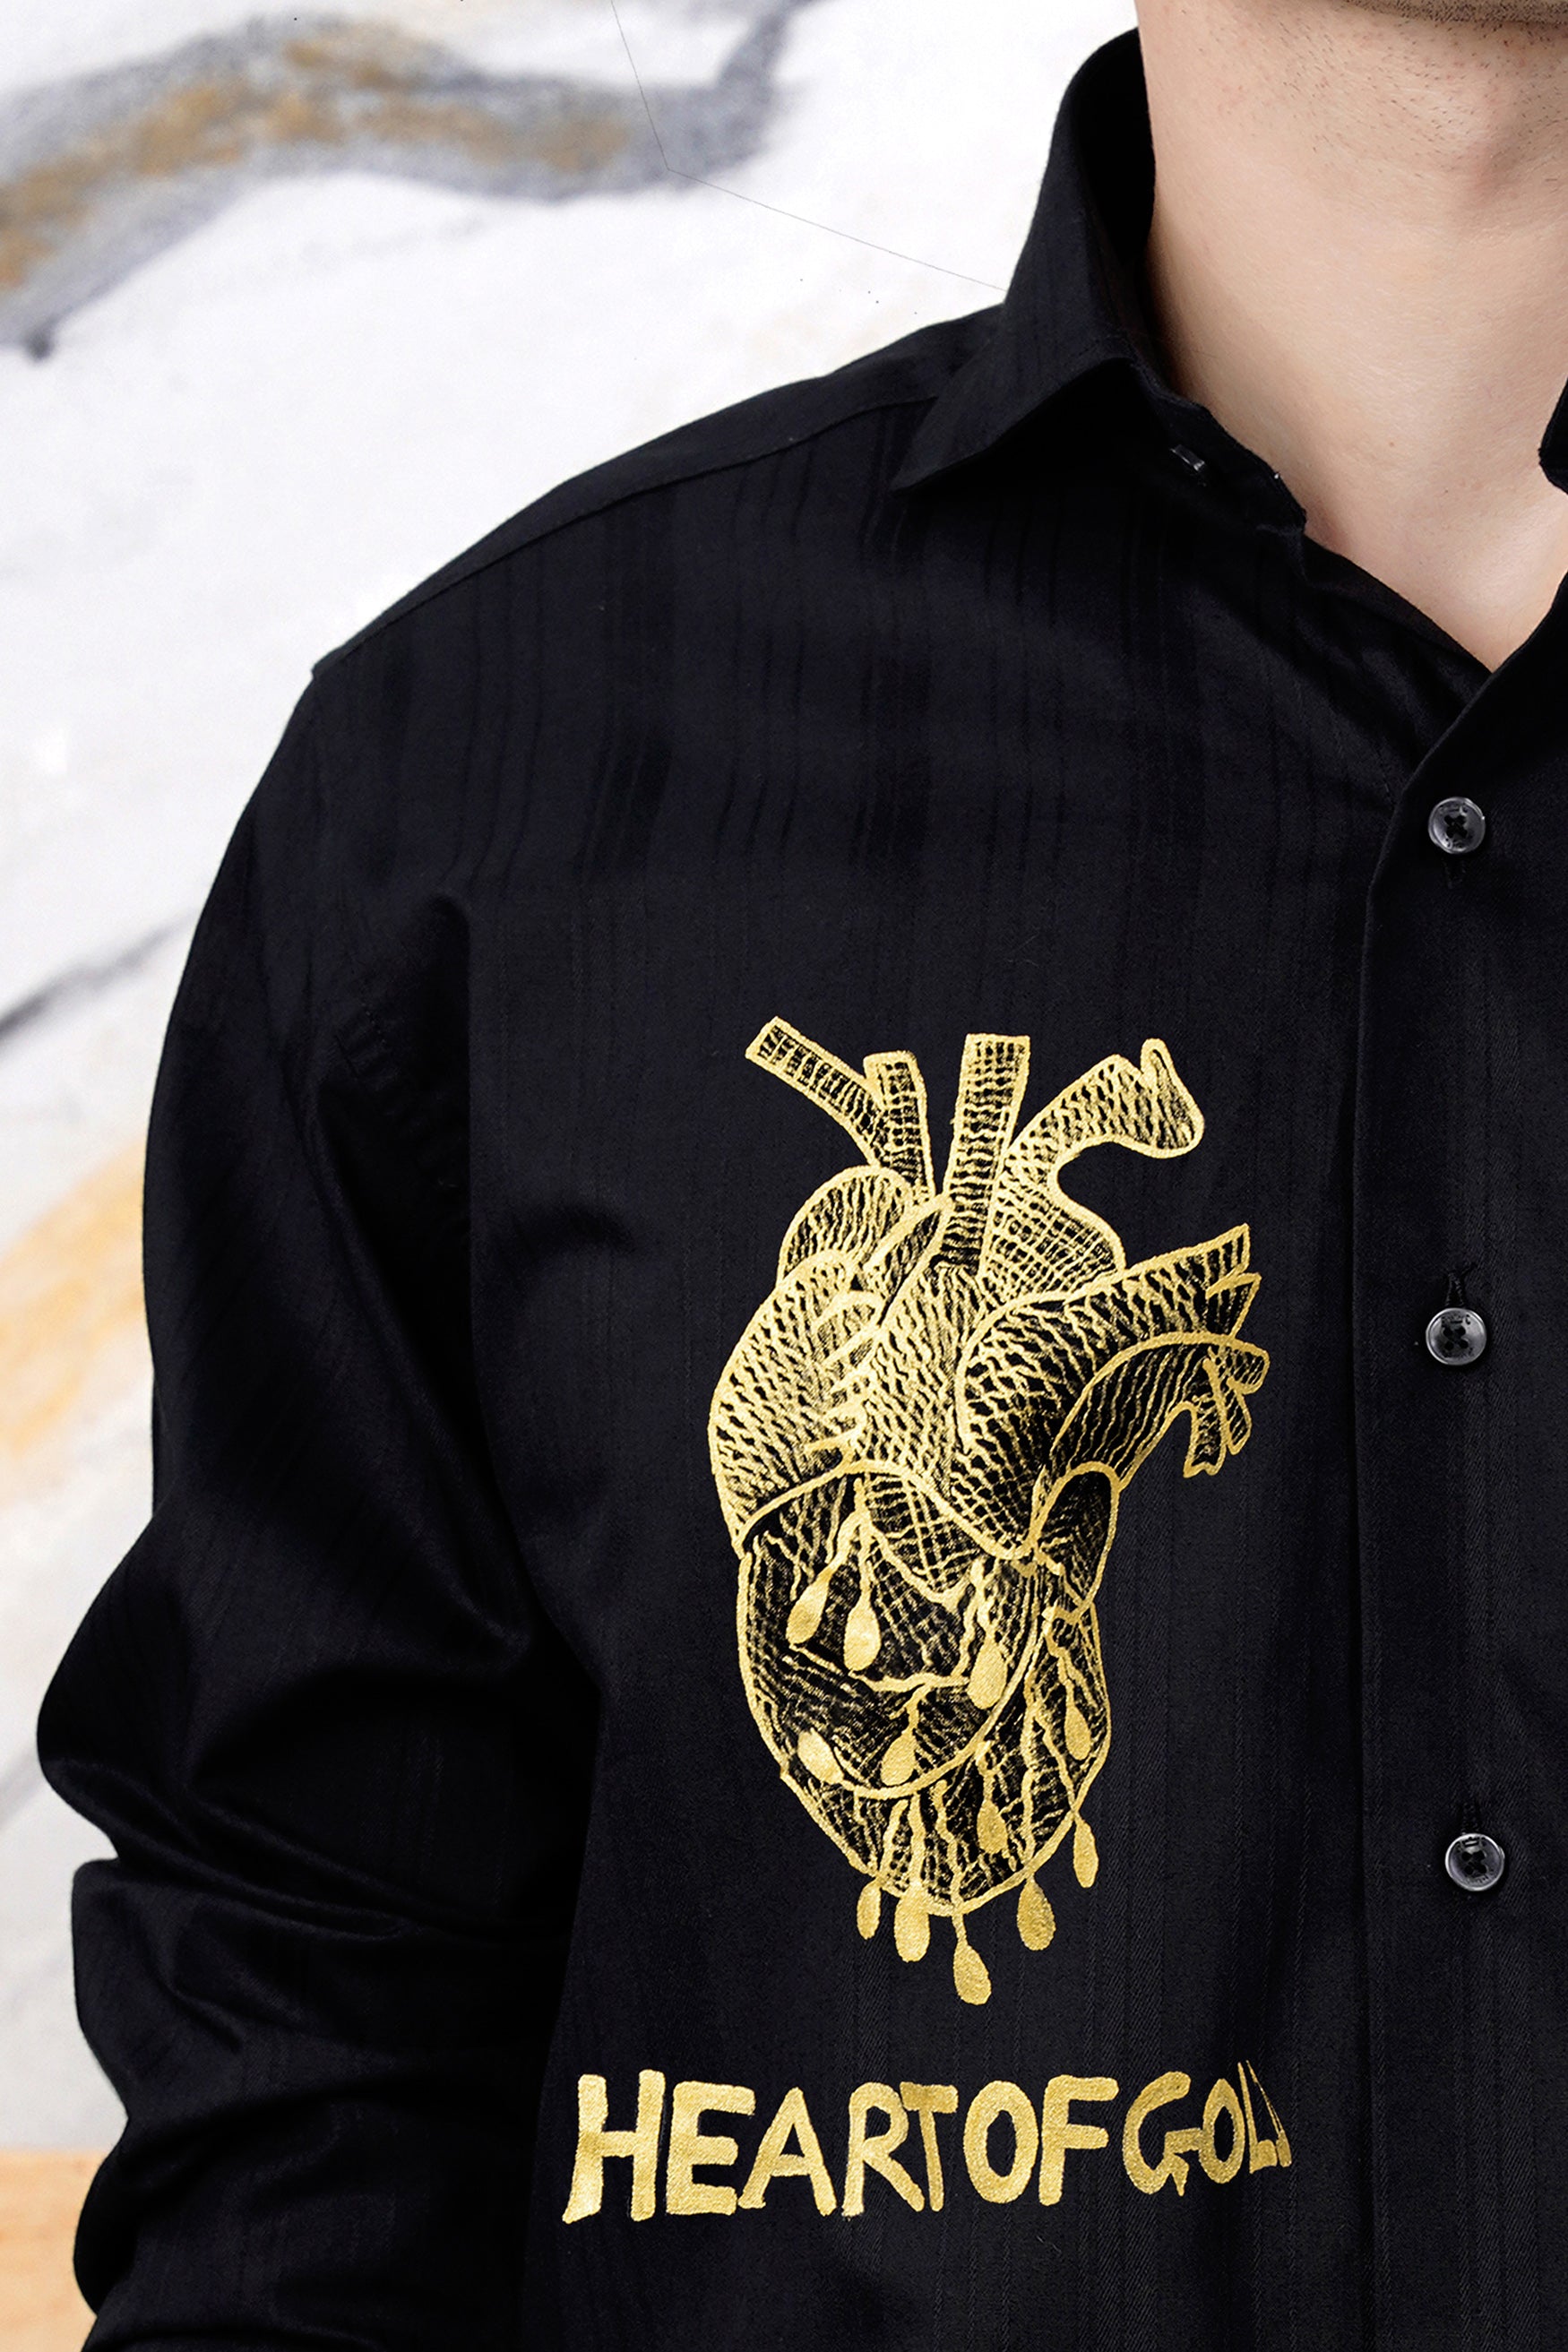 Jade Black With Hand Painted Heart of Gold Dobby Textured Premium Giza Cotton Shirt